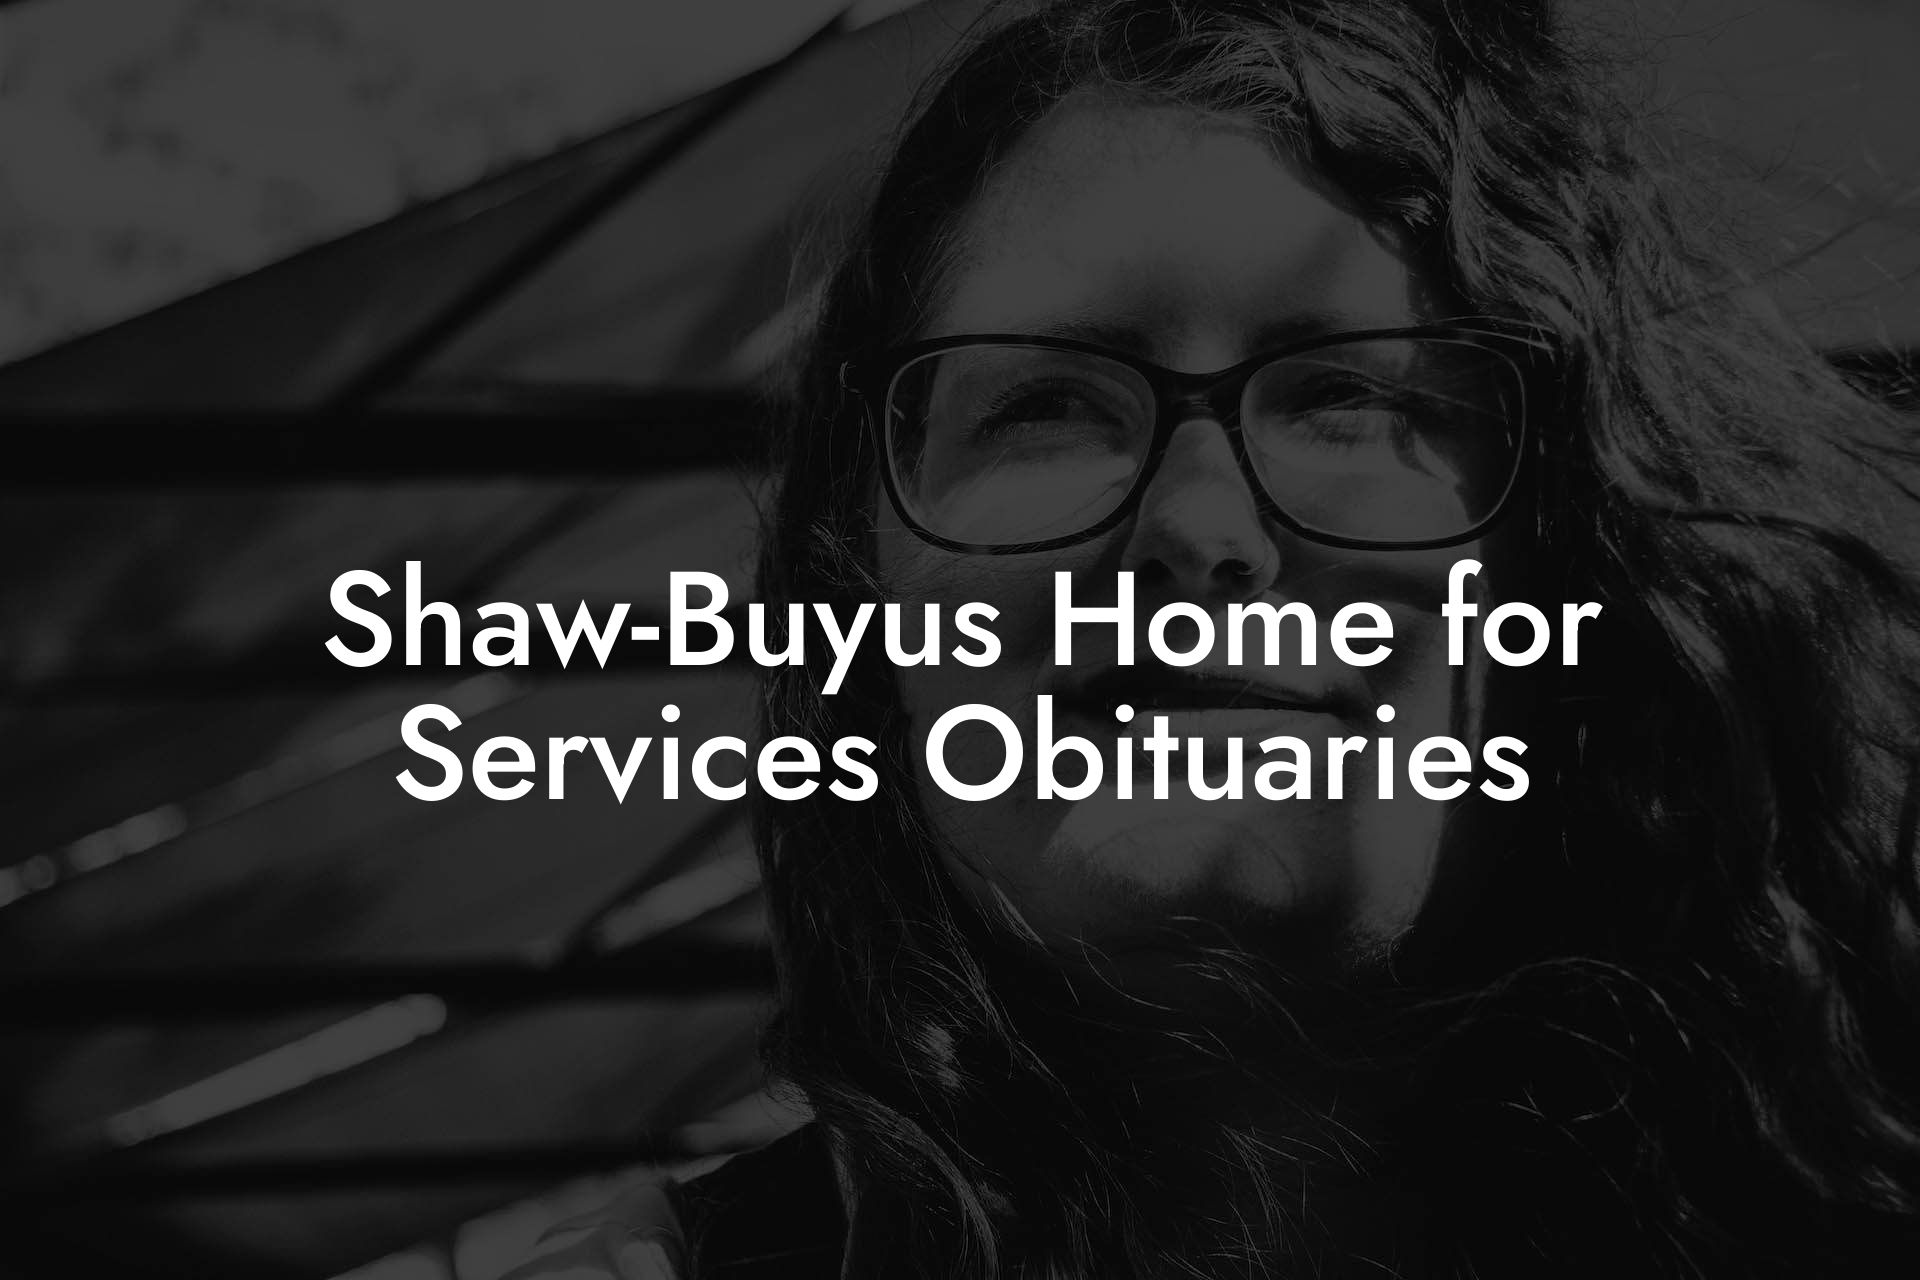 Shaw-Buyus Home for Services Obituaries